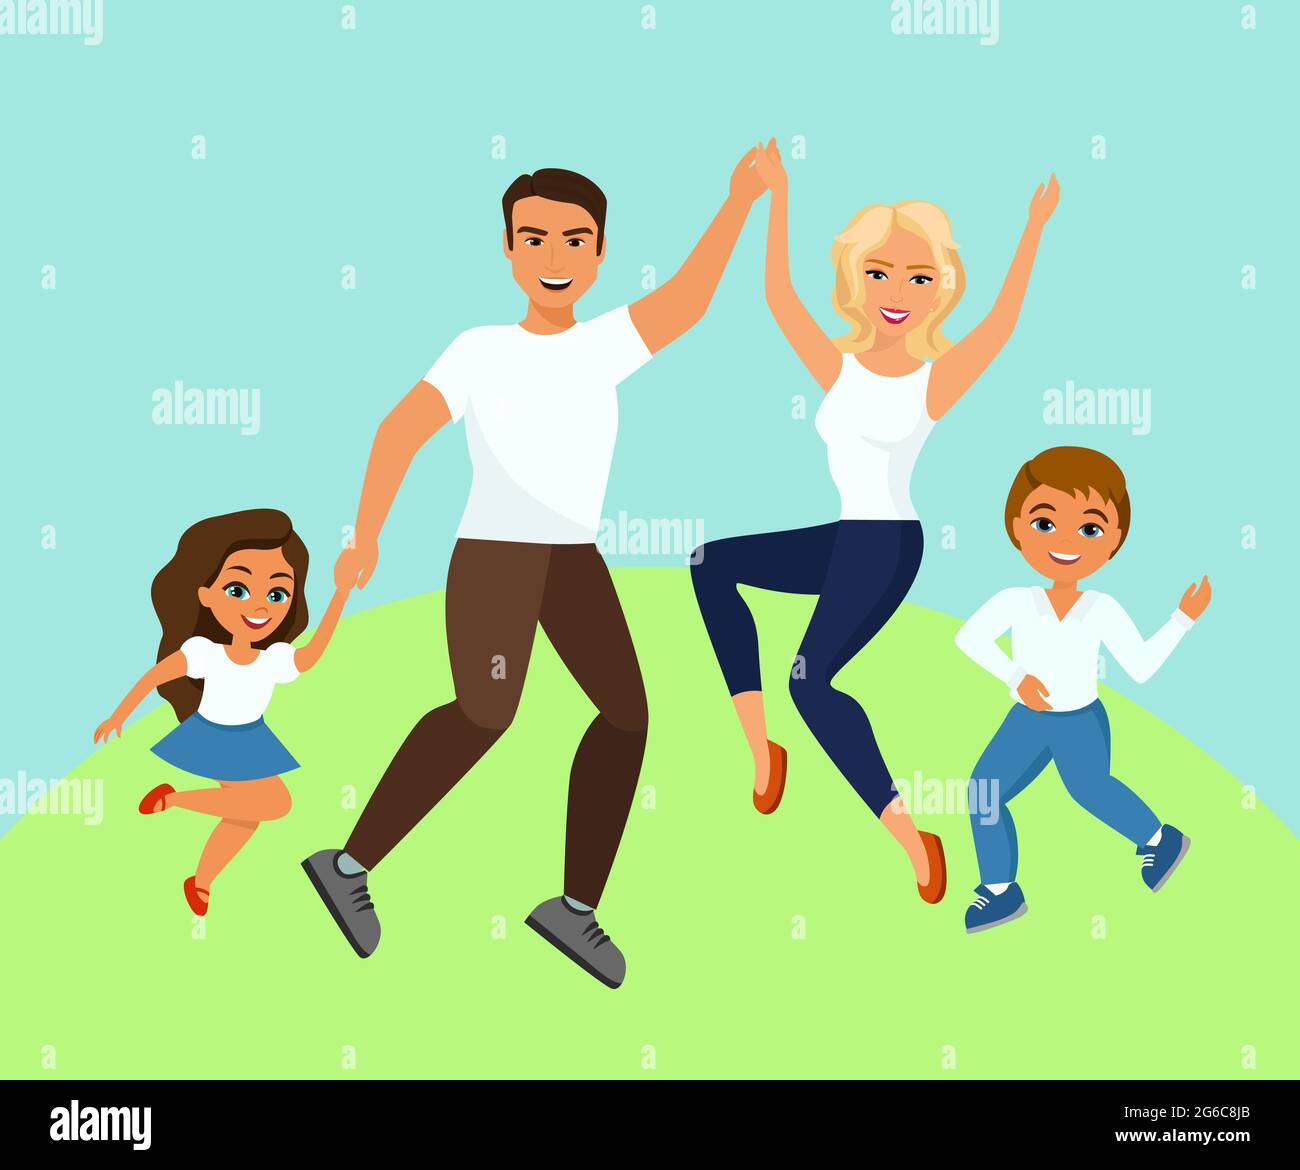 Vector illustration of Joyful family jumping. Happy and smiling dad mom daughter and son holding hands jumped in cartoon flat design. Stock Vector